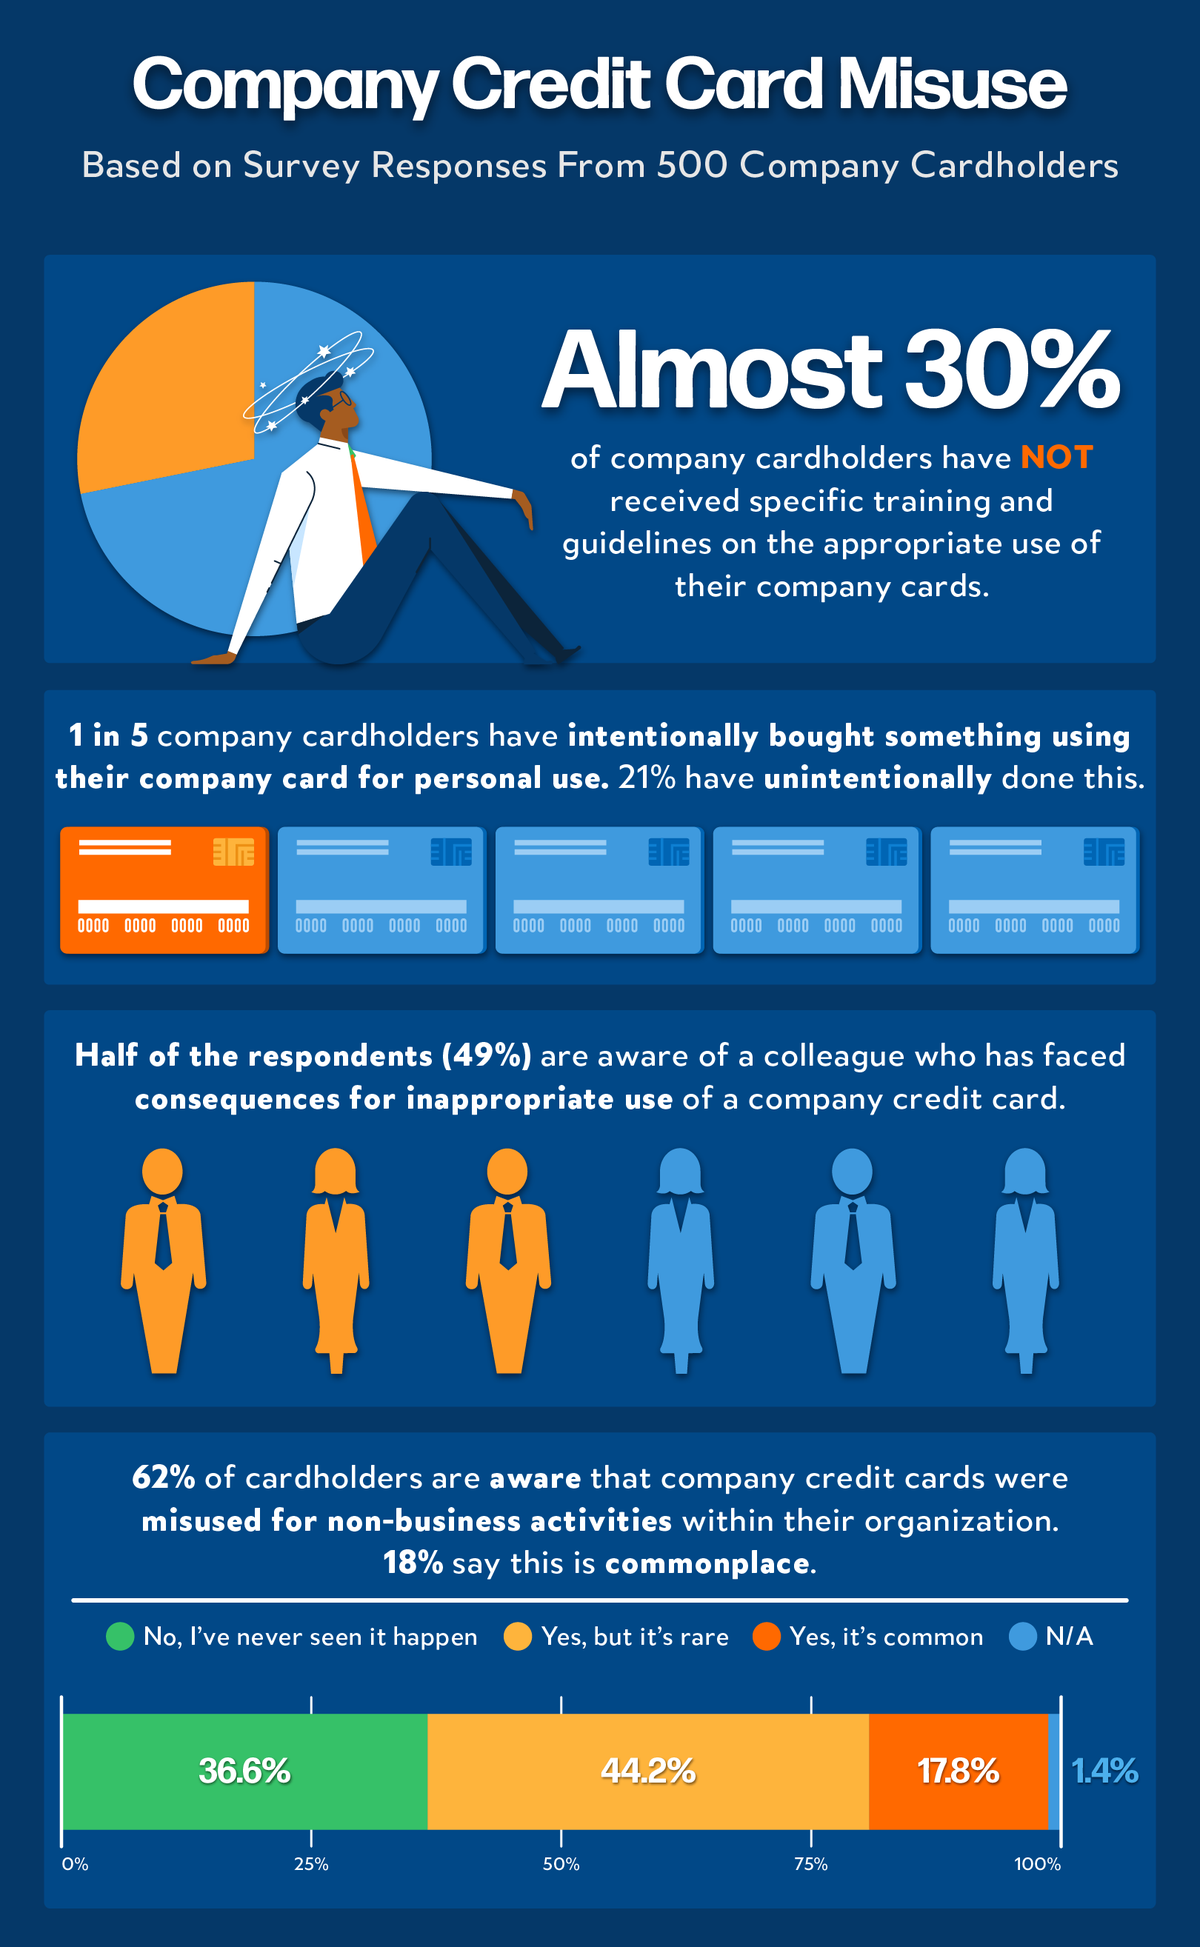 An infographic showing the results of a survey about how employees misuse company credit cards